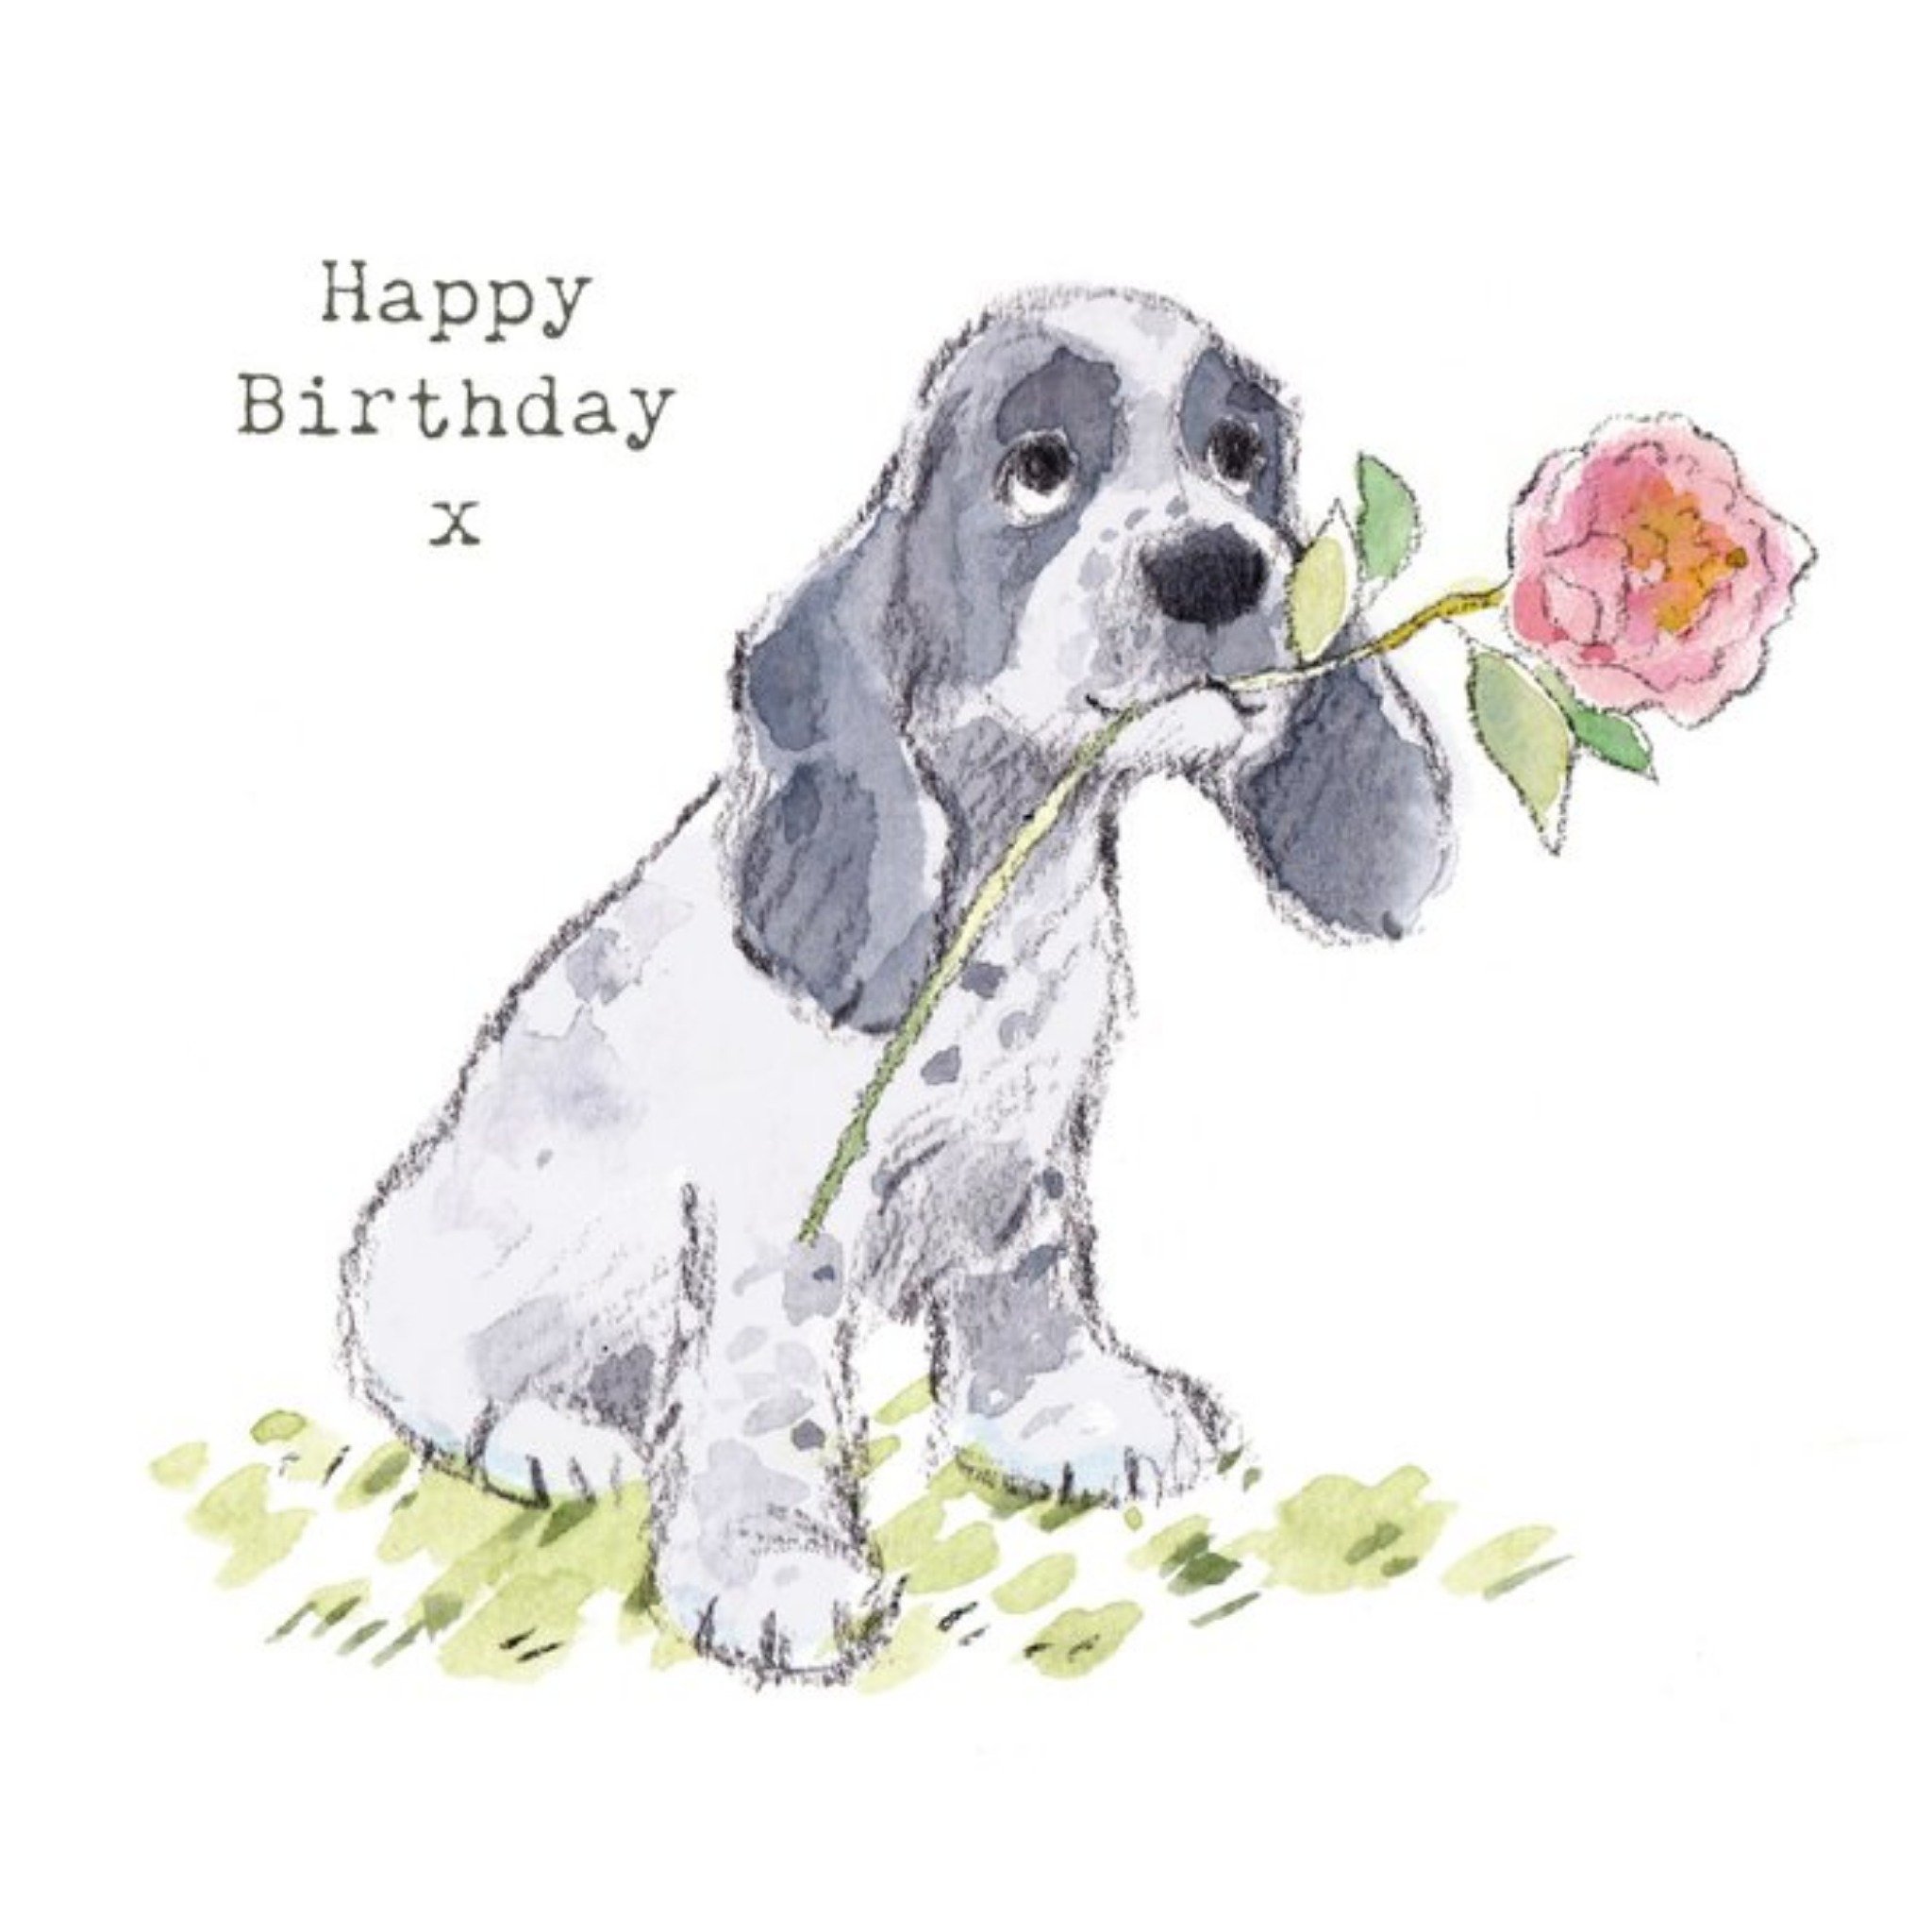 Moonpig Illustration Of A Cute Cocker Spaniel With A Rose Birthday Card, Large